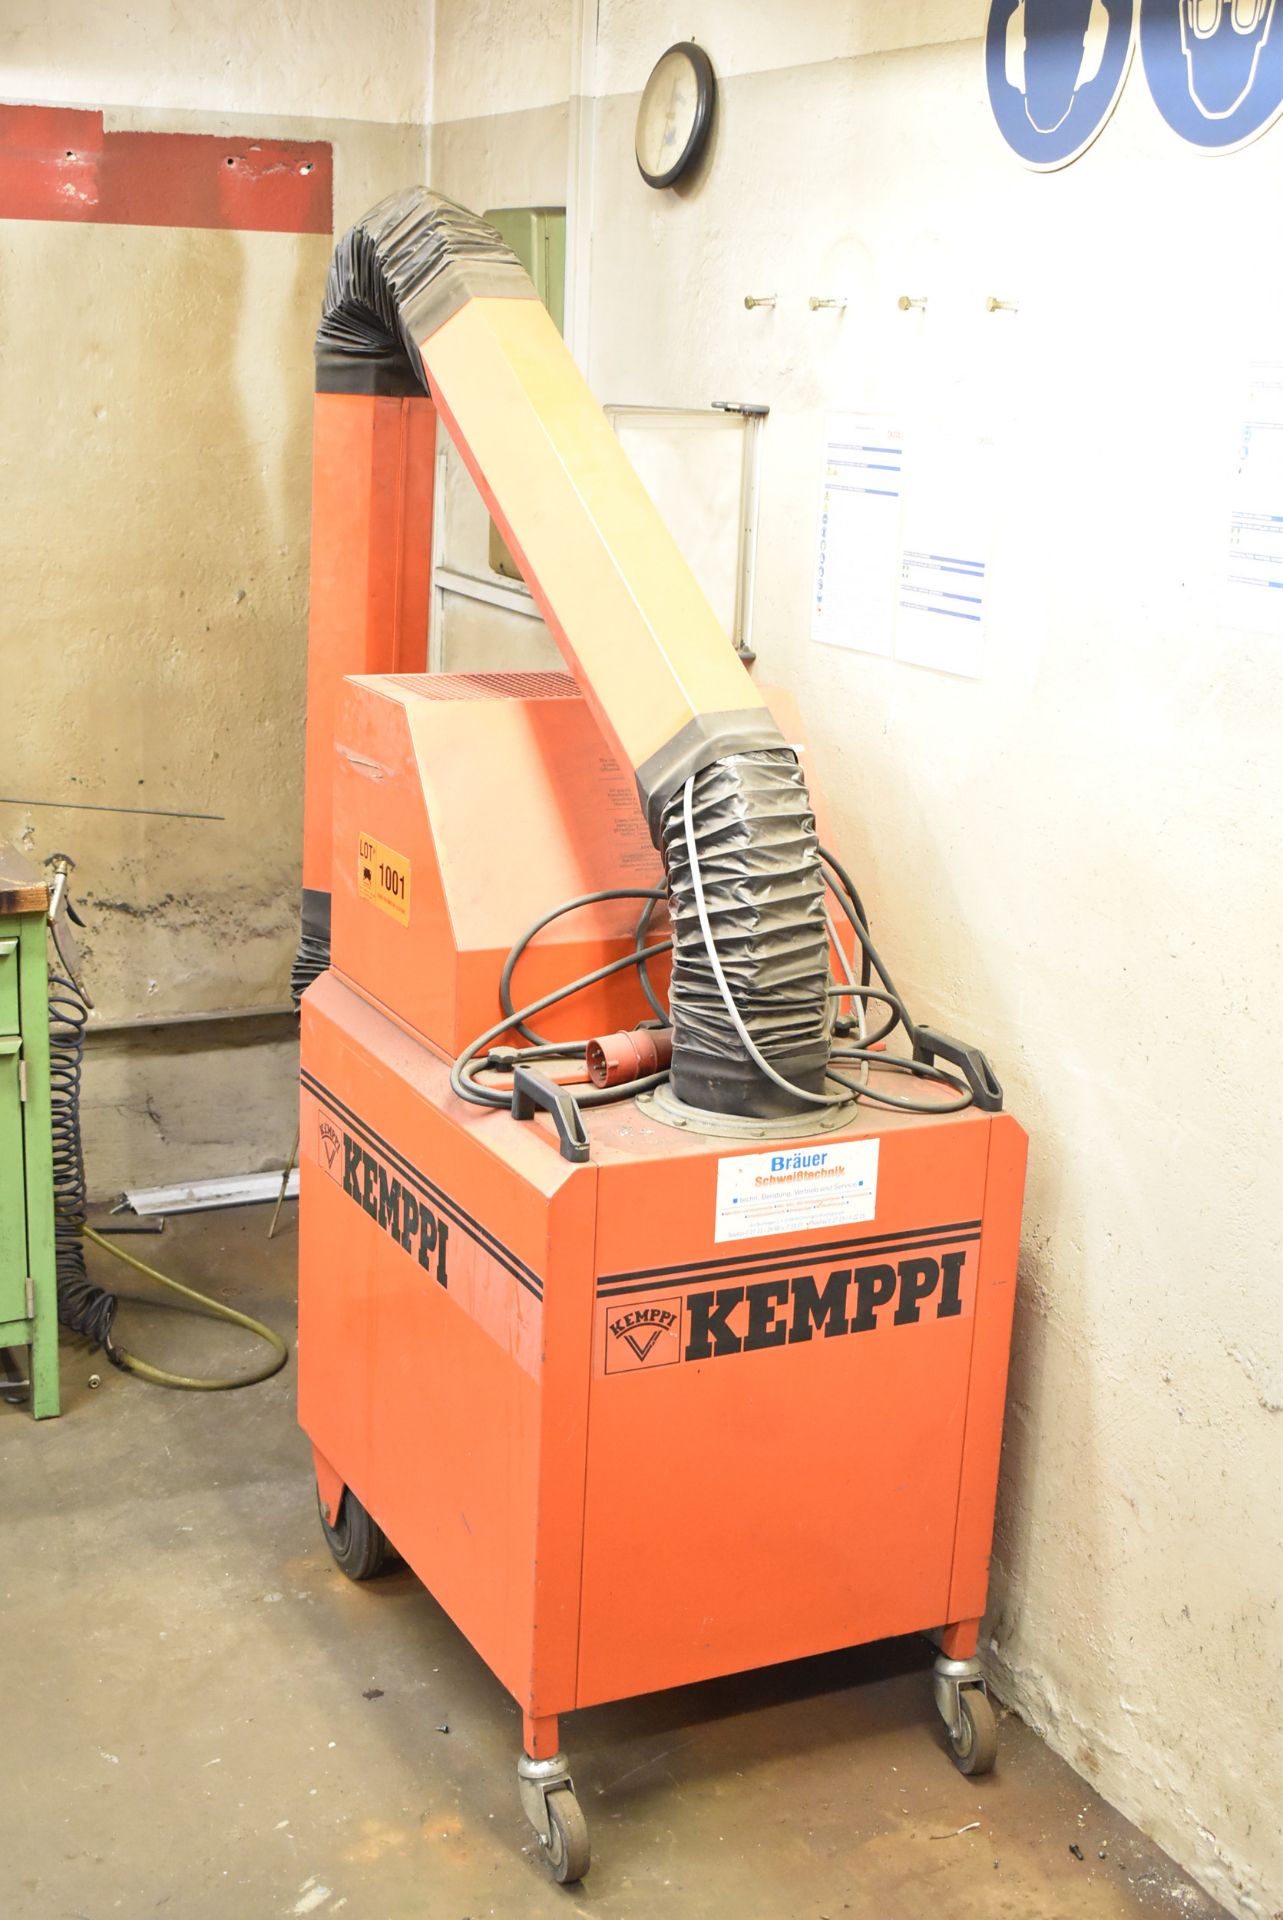 KEMPPI M1100 PORTABLE WELDING FUME EXTRACTOR, S/N N/A (SEL) [Removal Fee = € 27.50 + applicable - Image 3 of 3